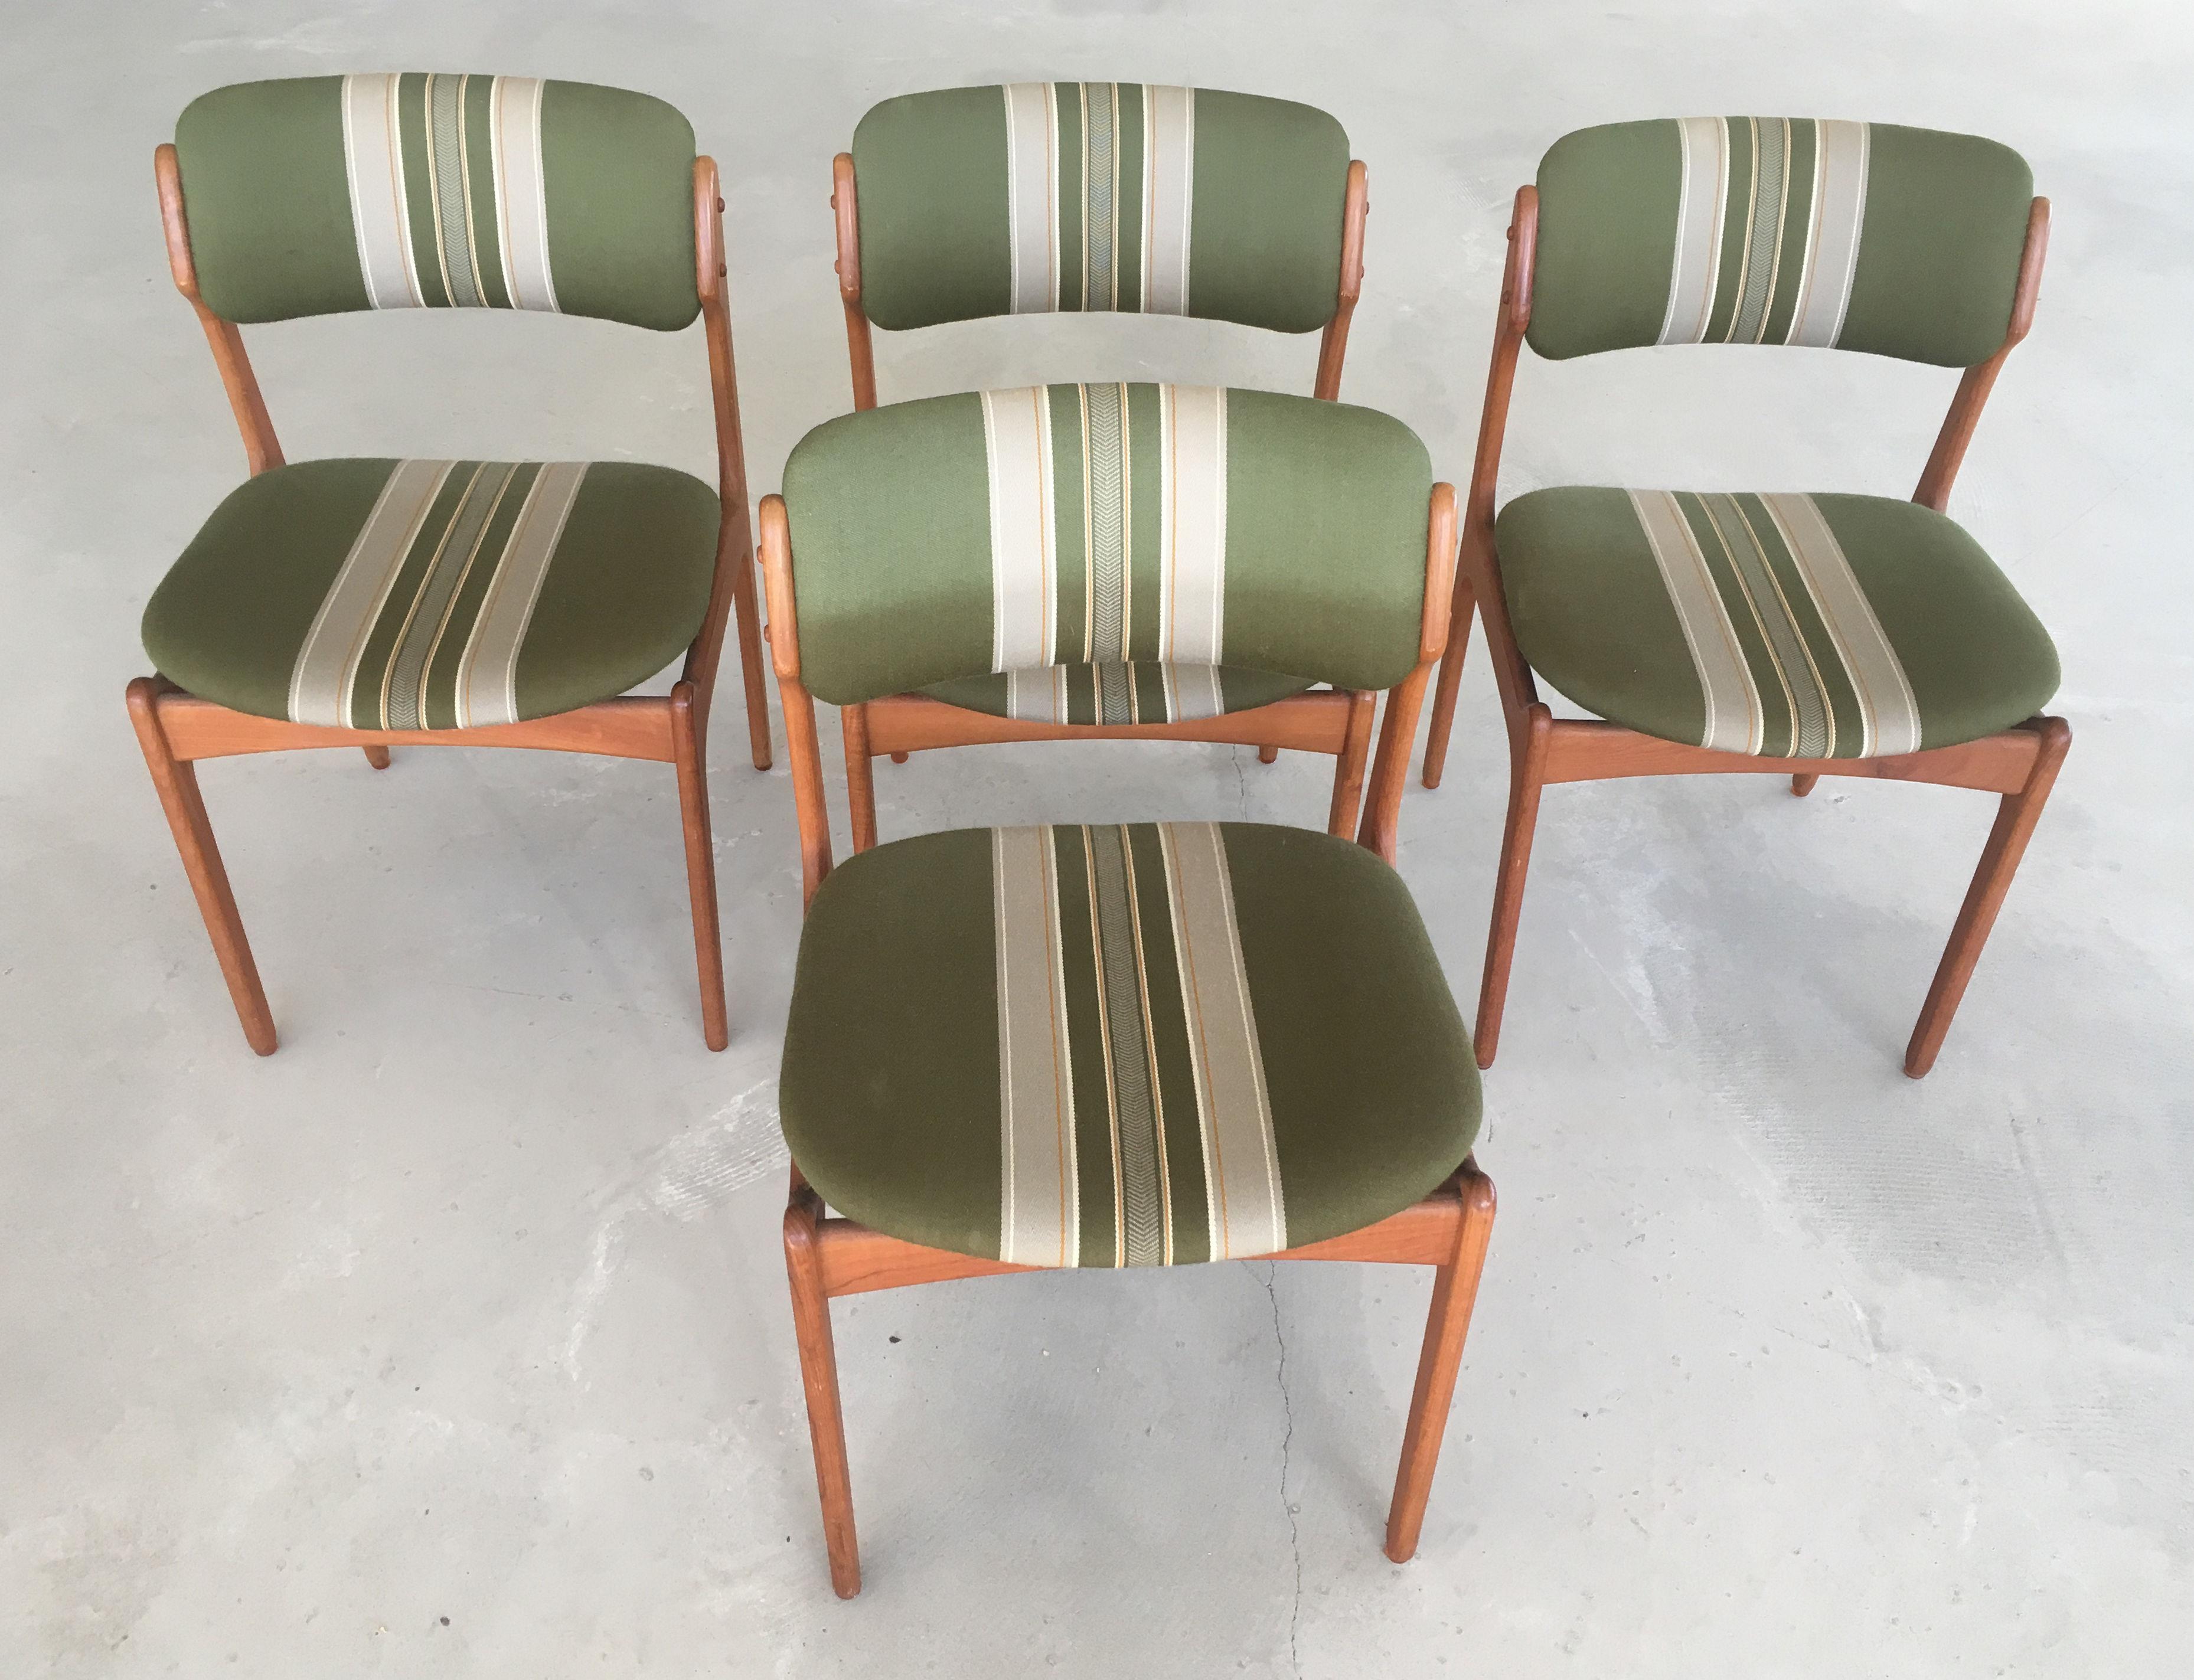 1960s set of four teak dining chairs with floating seat designed by Erik Buch for Oddense Maskinsnedkeri.

The chairs have a simple solid construction with elegant lines and a comfortable seating experience on the floating seat design that is